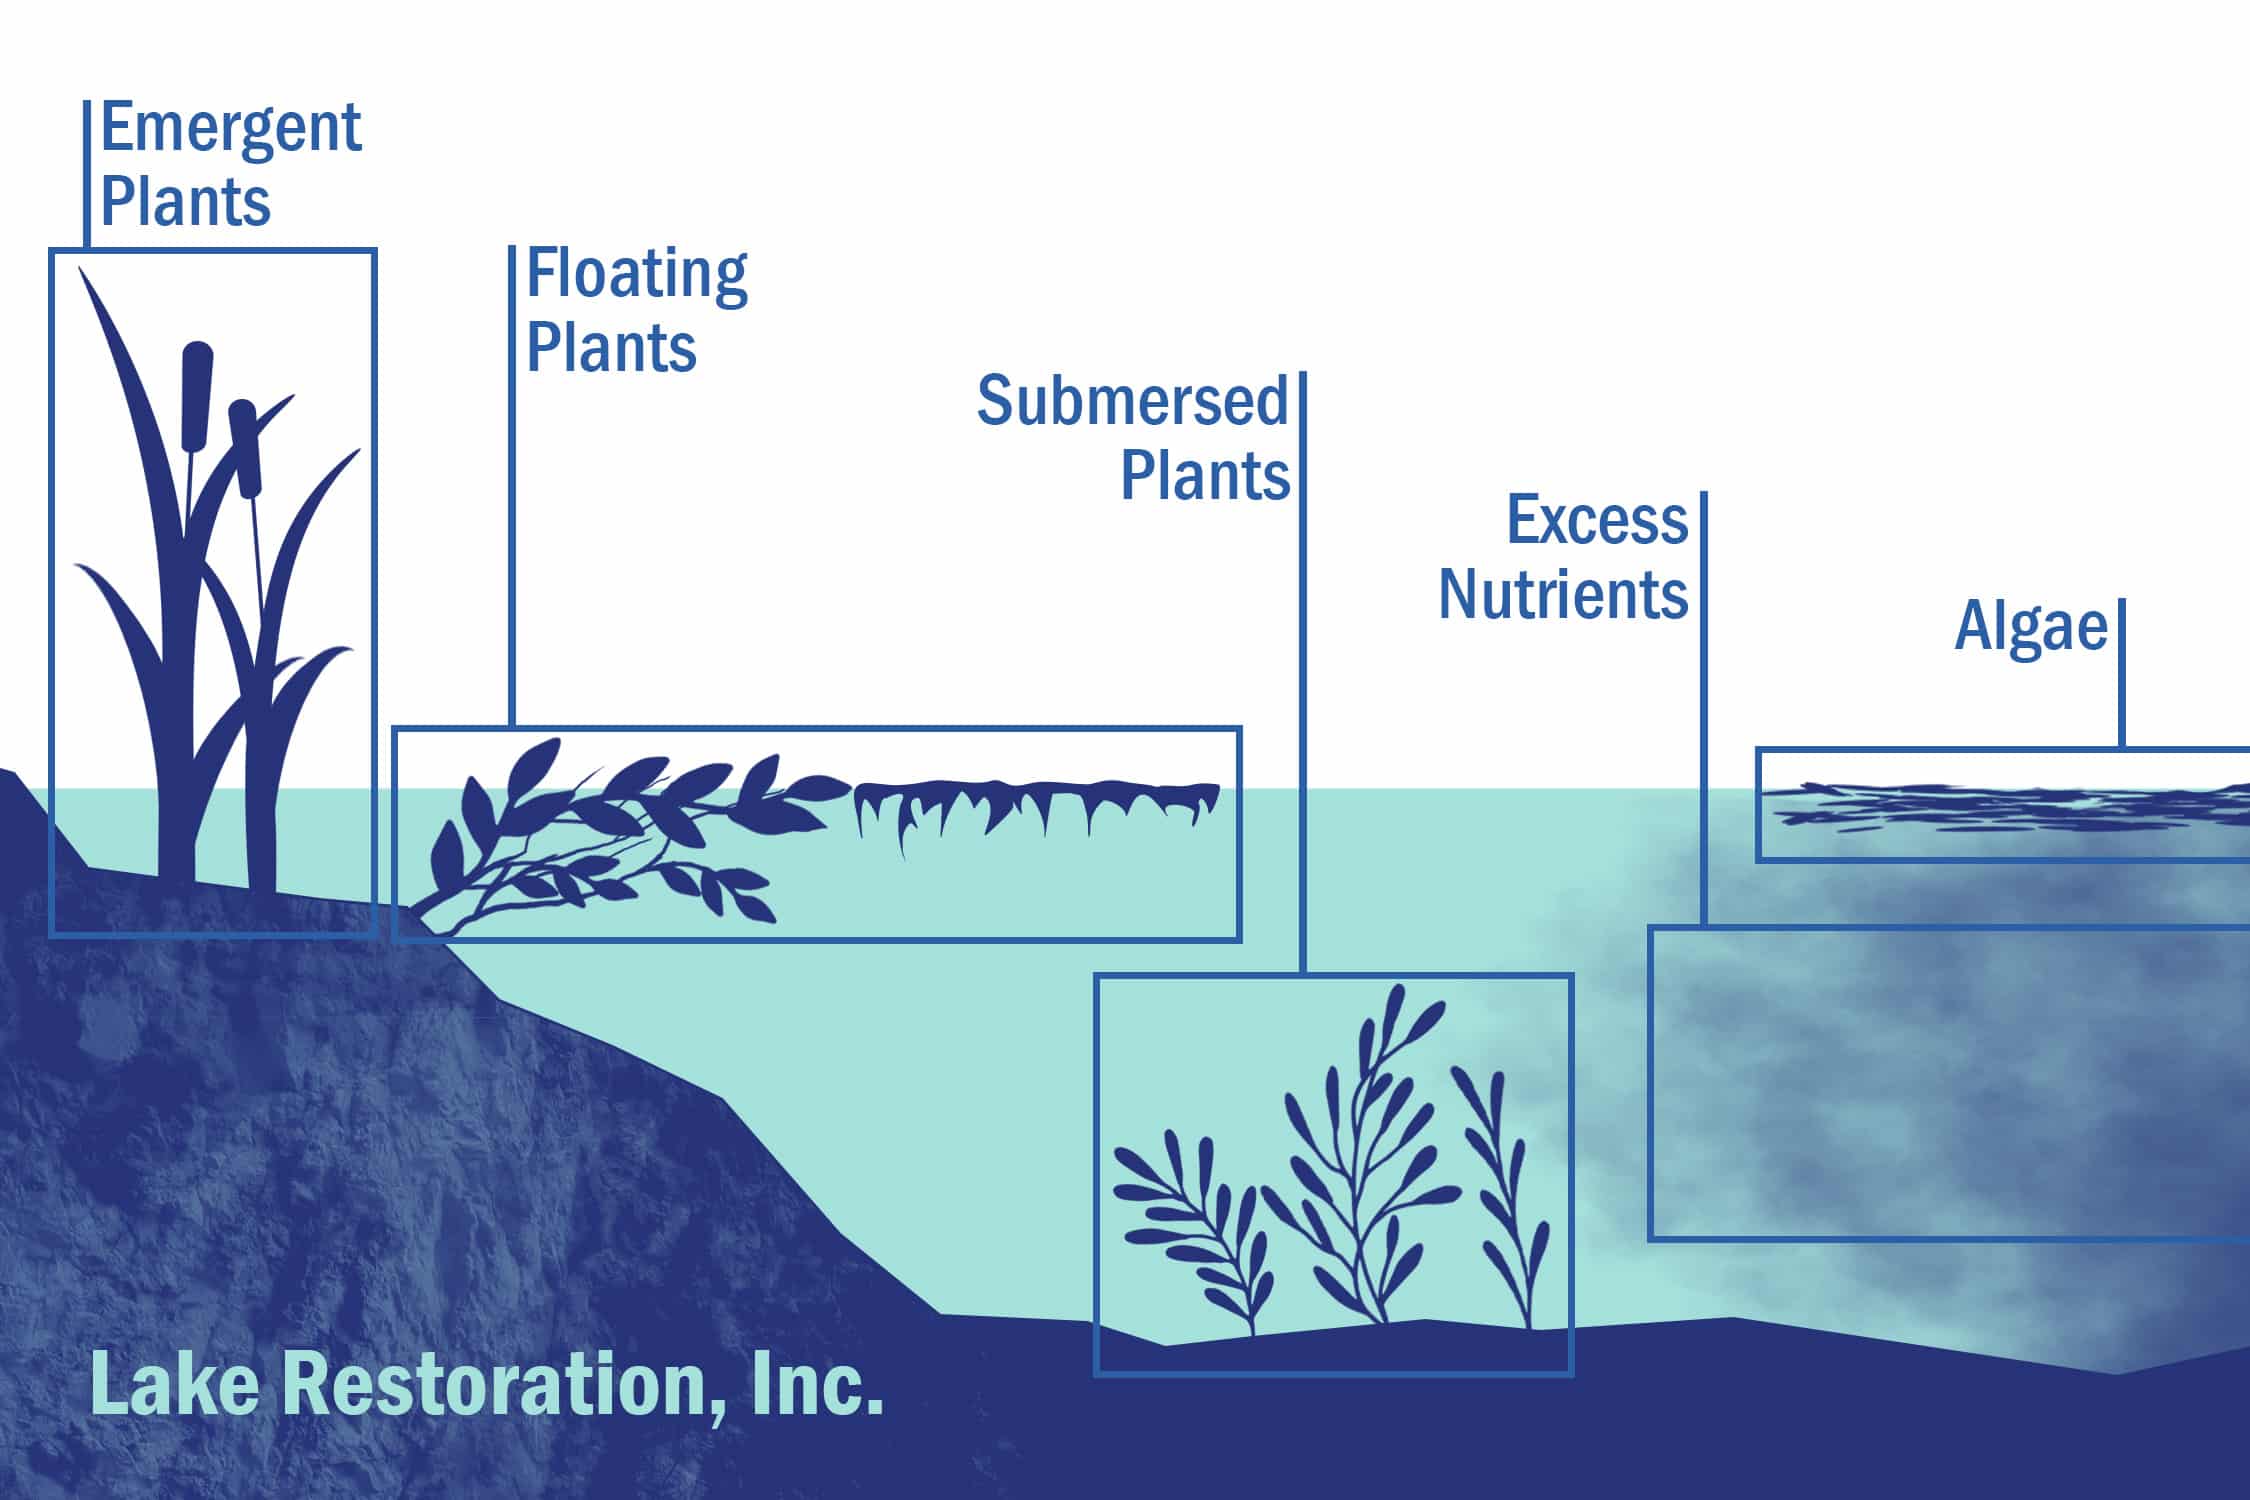 Visual example of types of aquatic weeds, including submersed weeds, free floating weeds, emergent weeds, rooted floating weeds, algae, and excess nutrients.